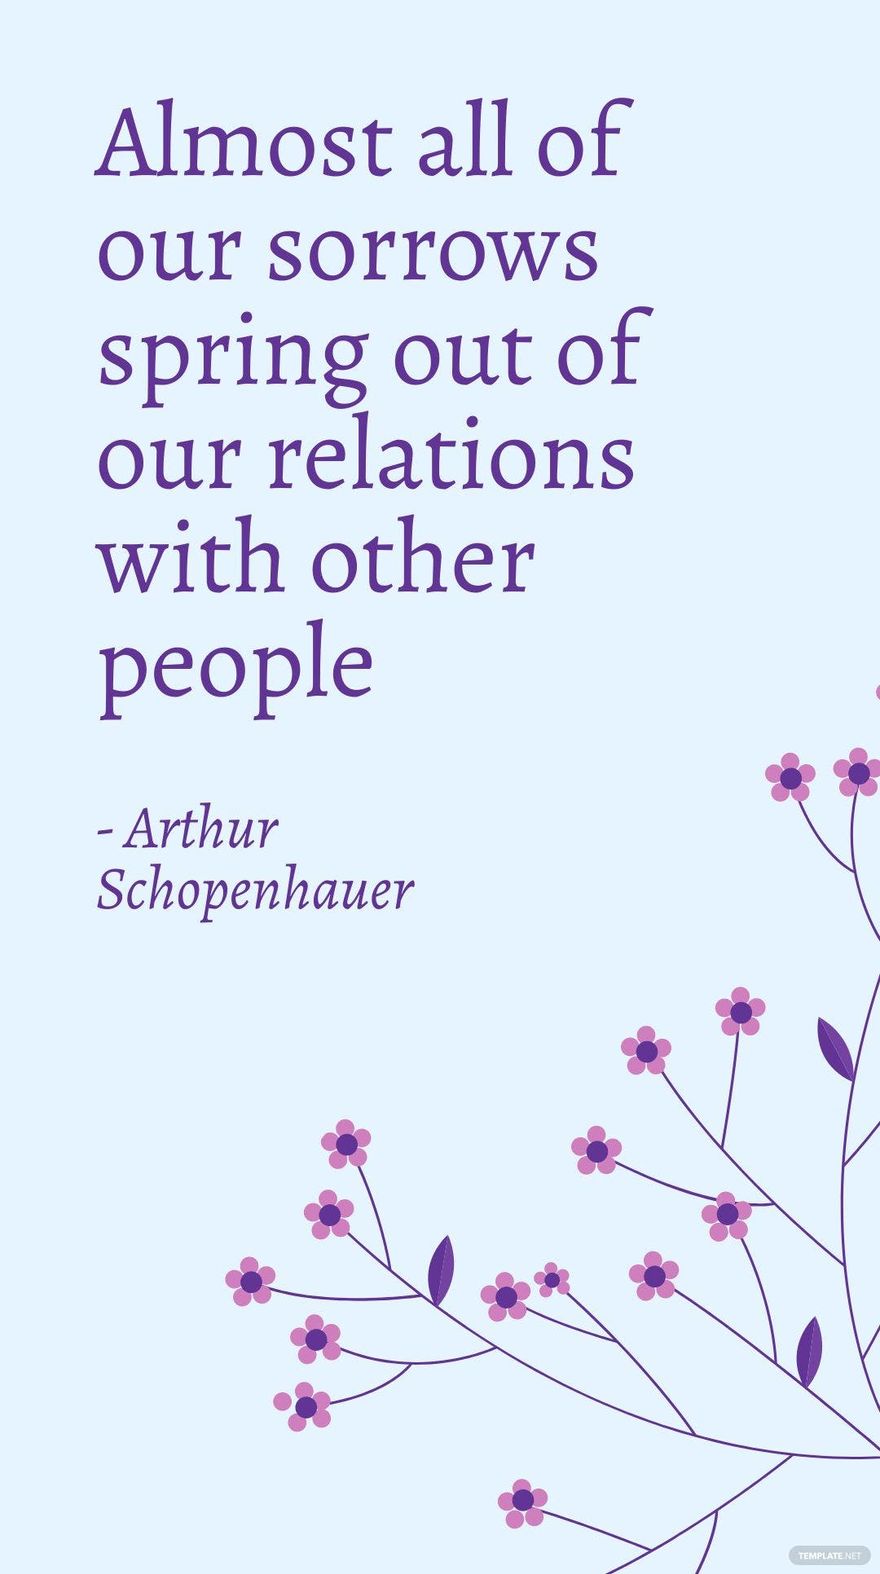 Arthur Schopenhauer - Almost all of our sorrows spring out of our relations with other people